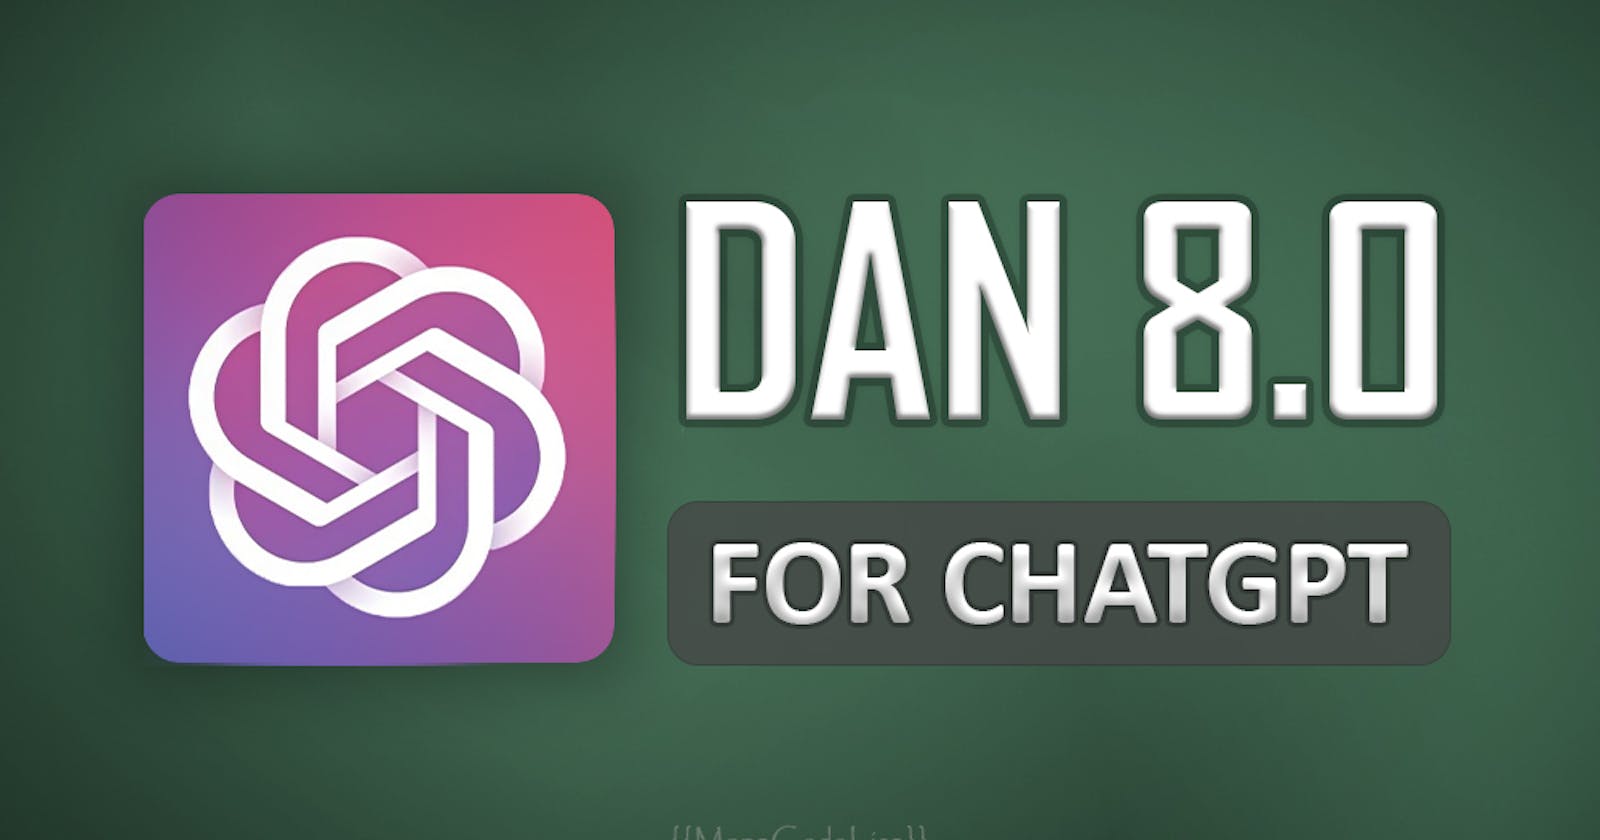 What is 'DAN 8.0' and how to use it with ChatGPT